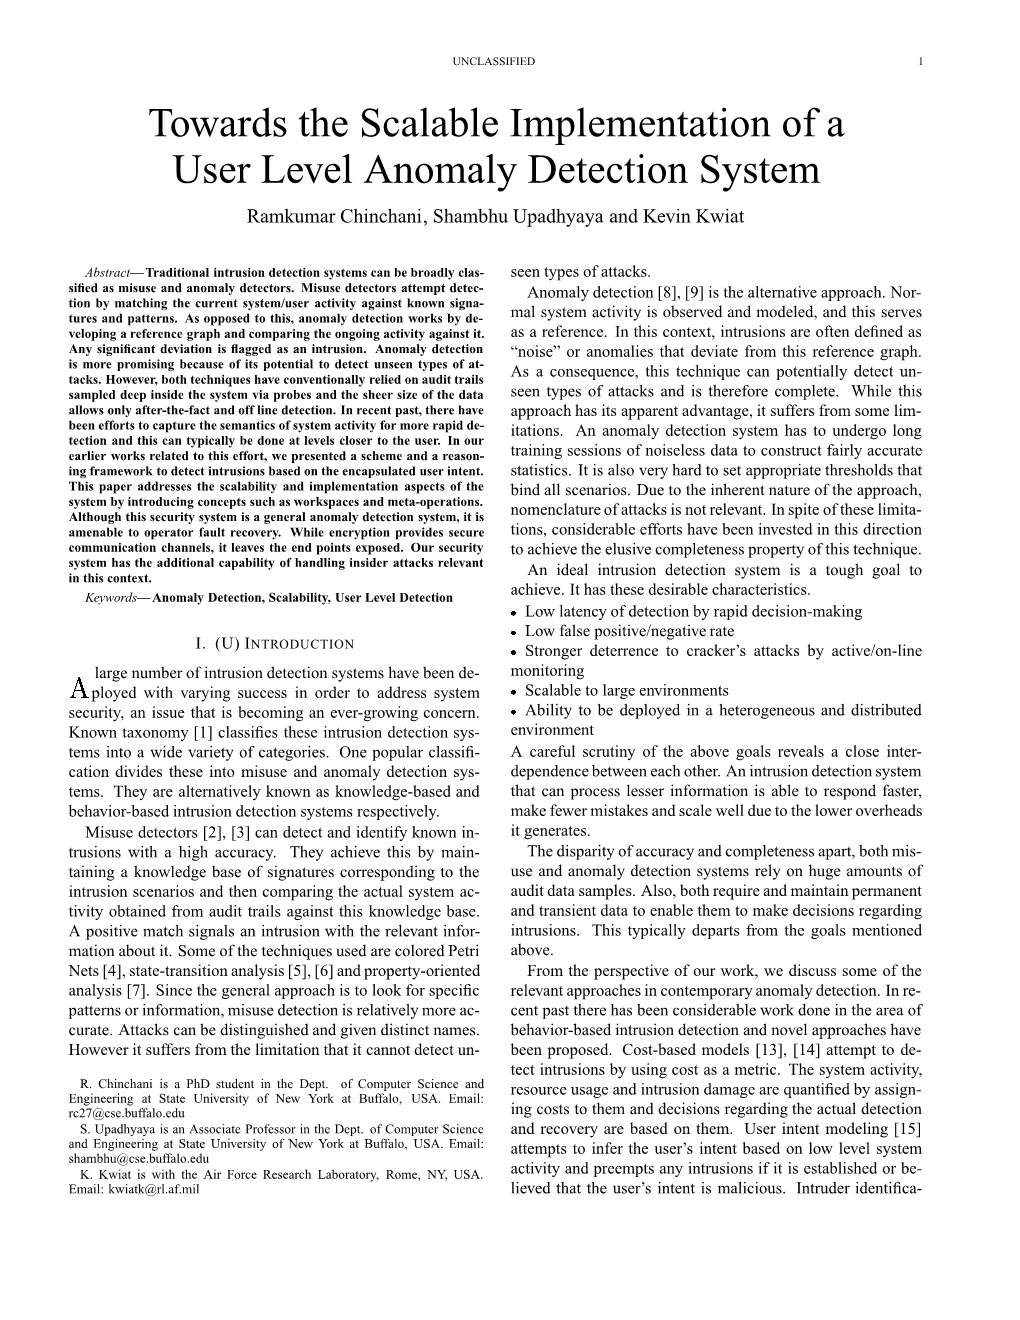 Towards the Scalable Implementation of an Anomaly Detection System